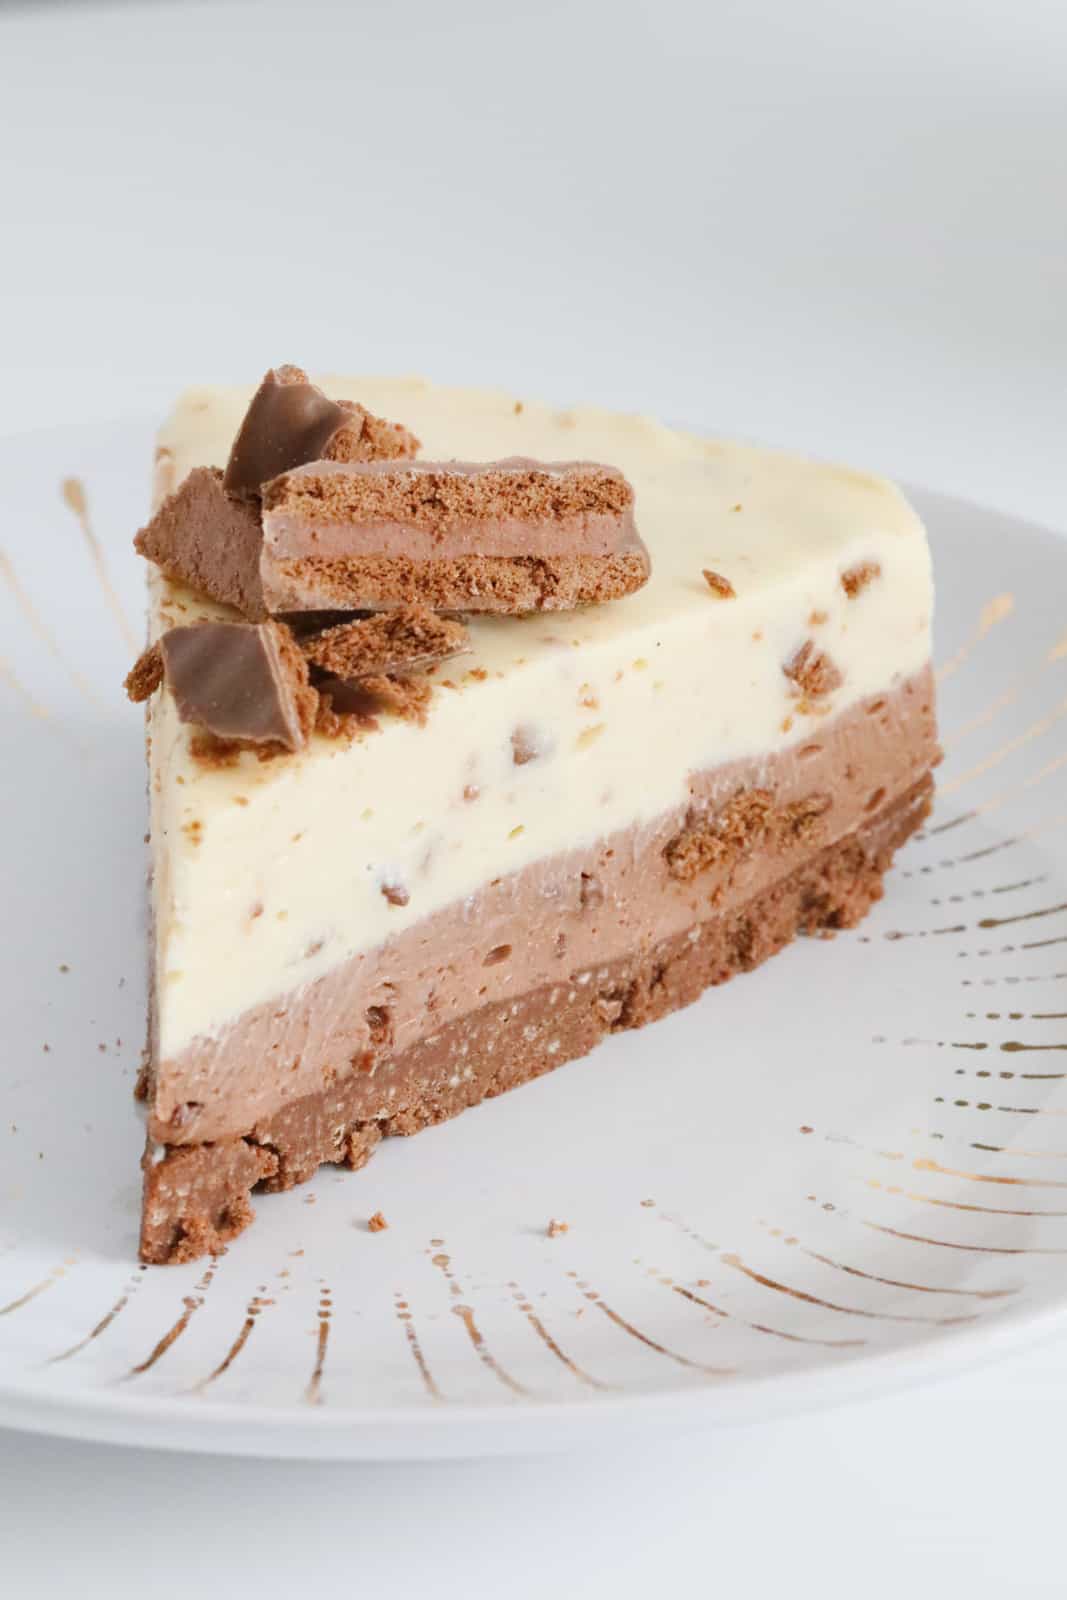 A piece of cheesecake with chopped Tim Tams on top.